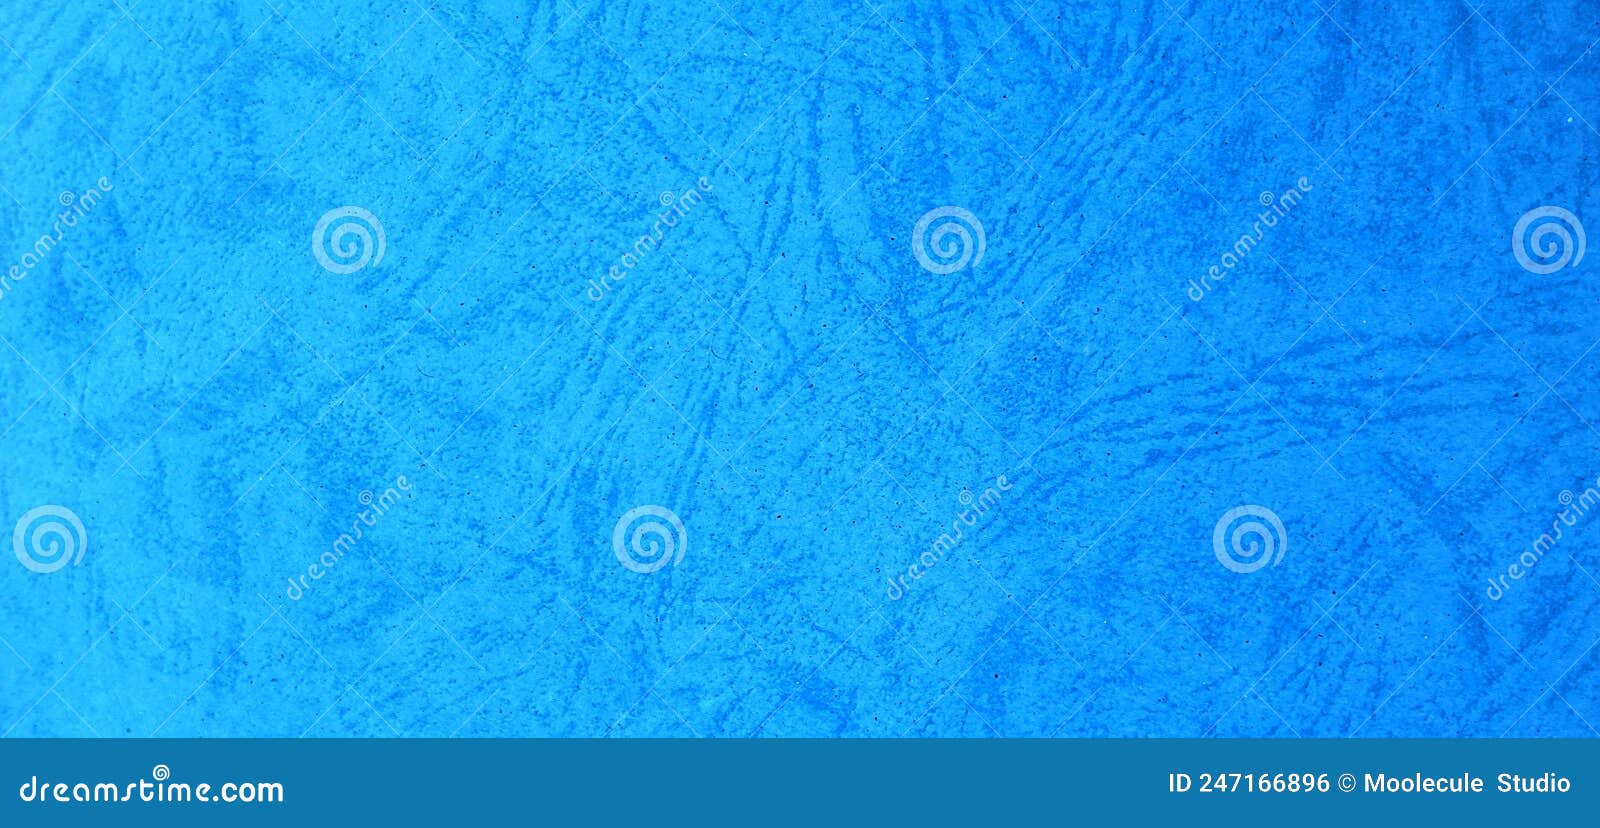 Abstract sky blue paper texture backgrounds with dark blue fibers